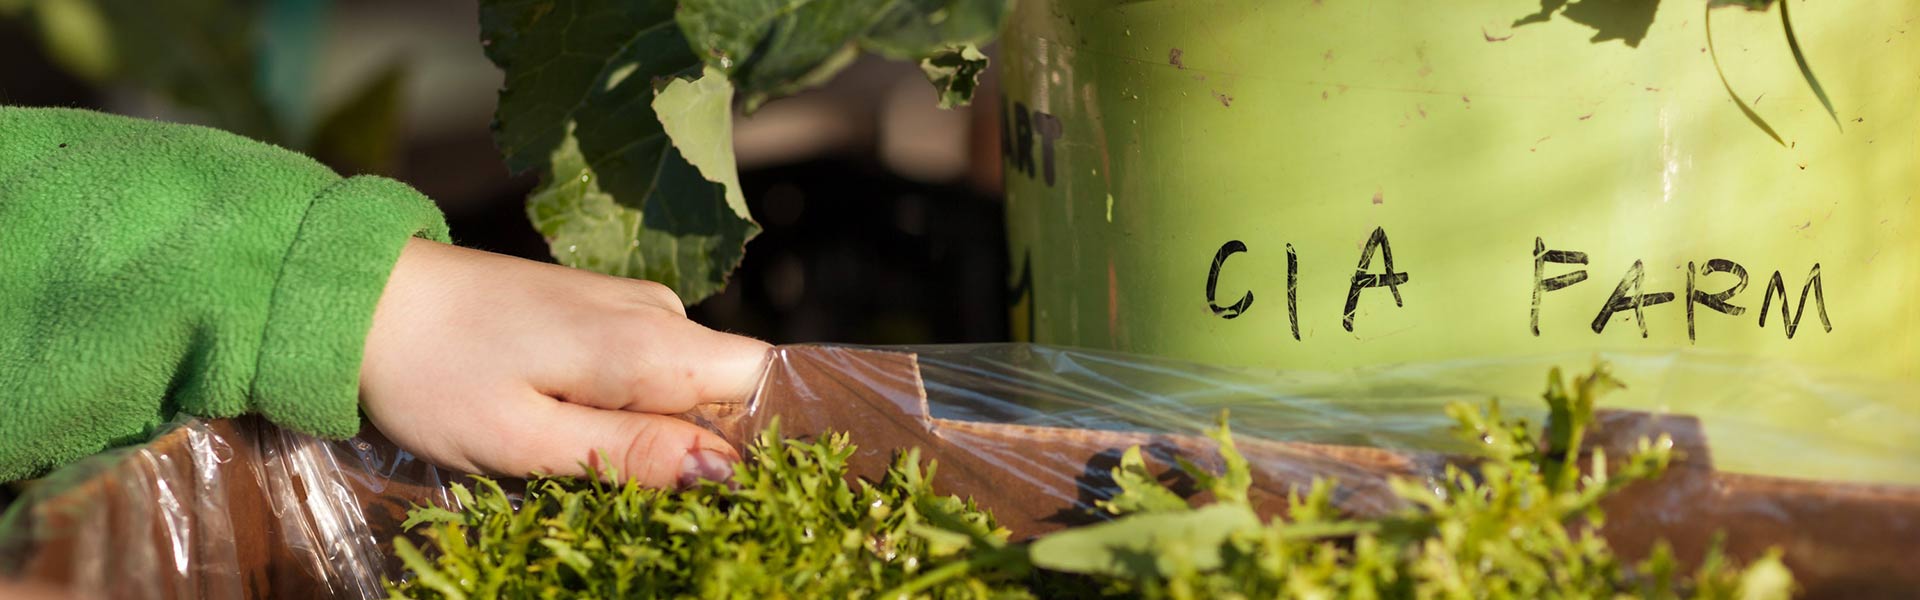 CIA Master’s Degree Programs - Sustainable Food Systems